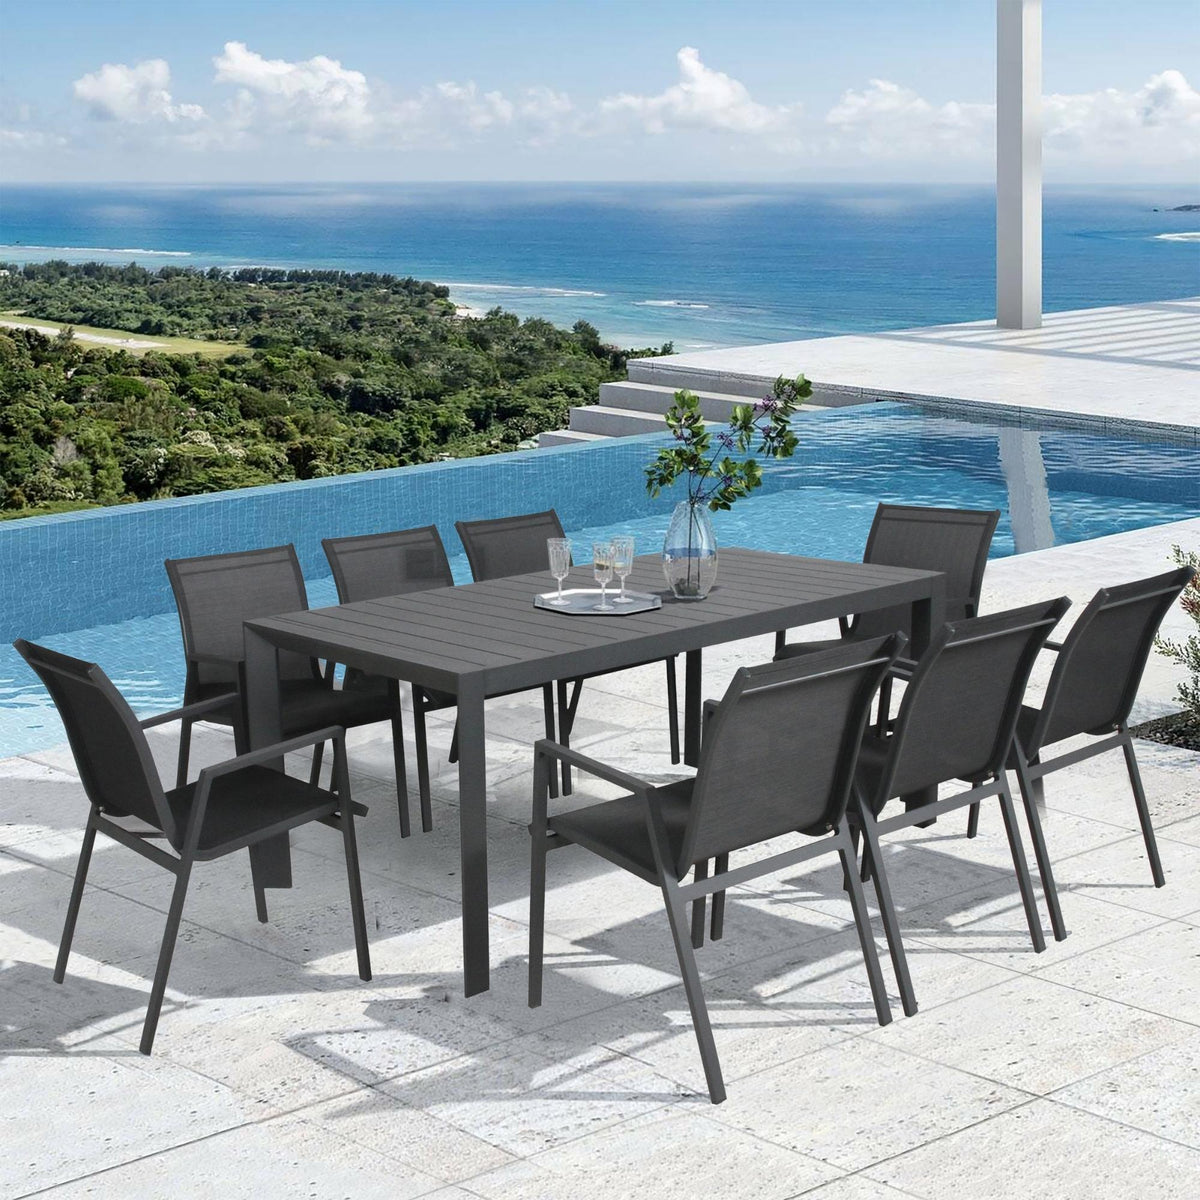 Iberia 13pc Outdoor Extensible Dining Table Chair Set Charcoal 